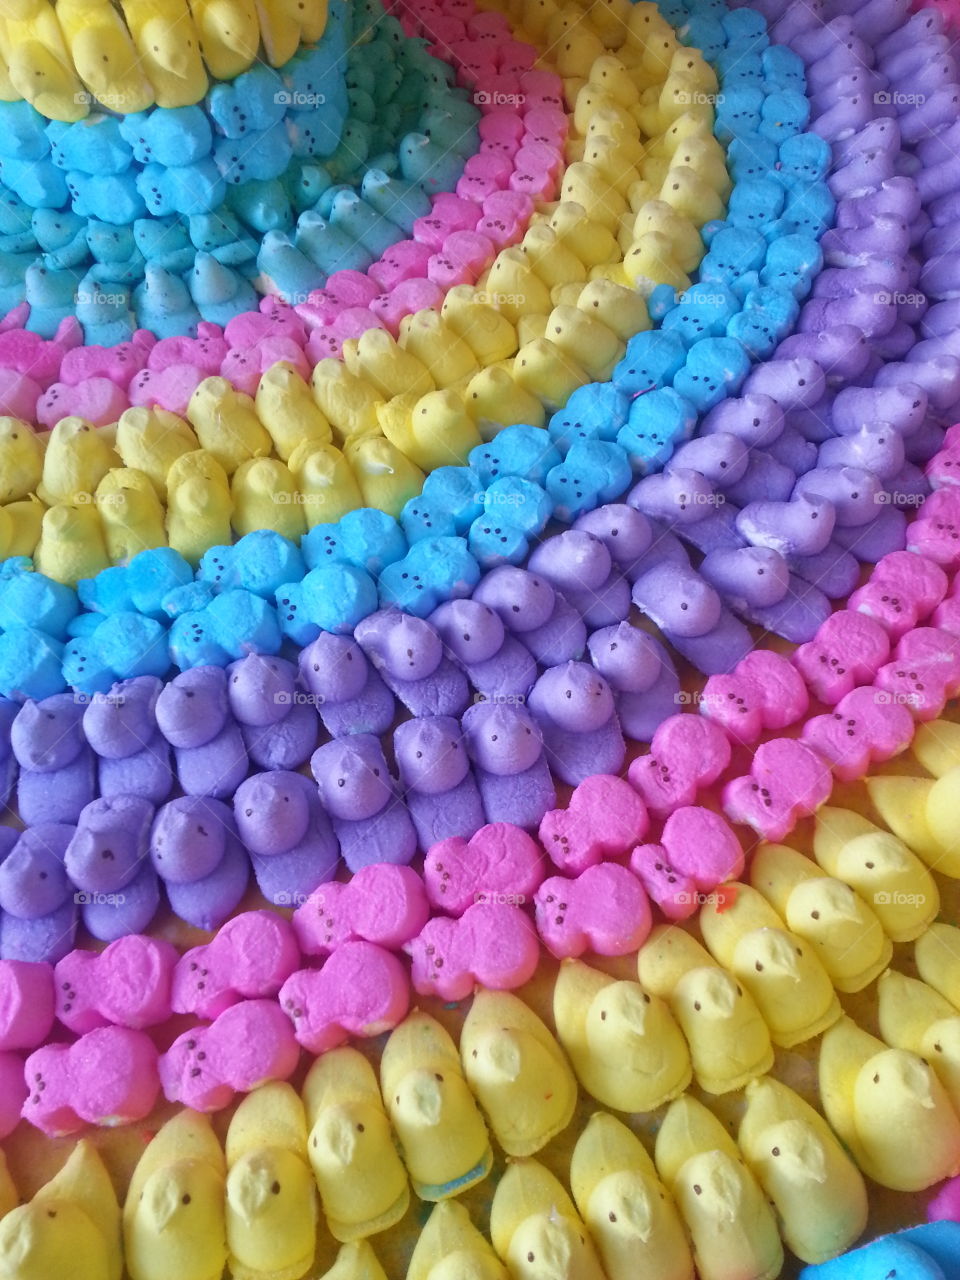 Peeps. They have a "Peep Fest" in our area to show of handiwork using marshmallow Peeps.